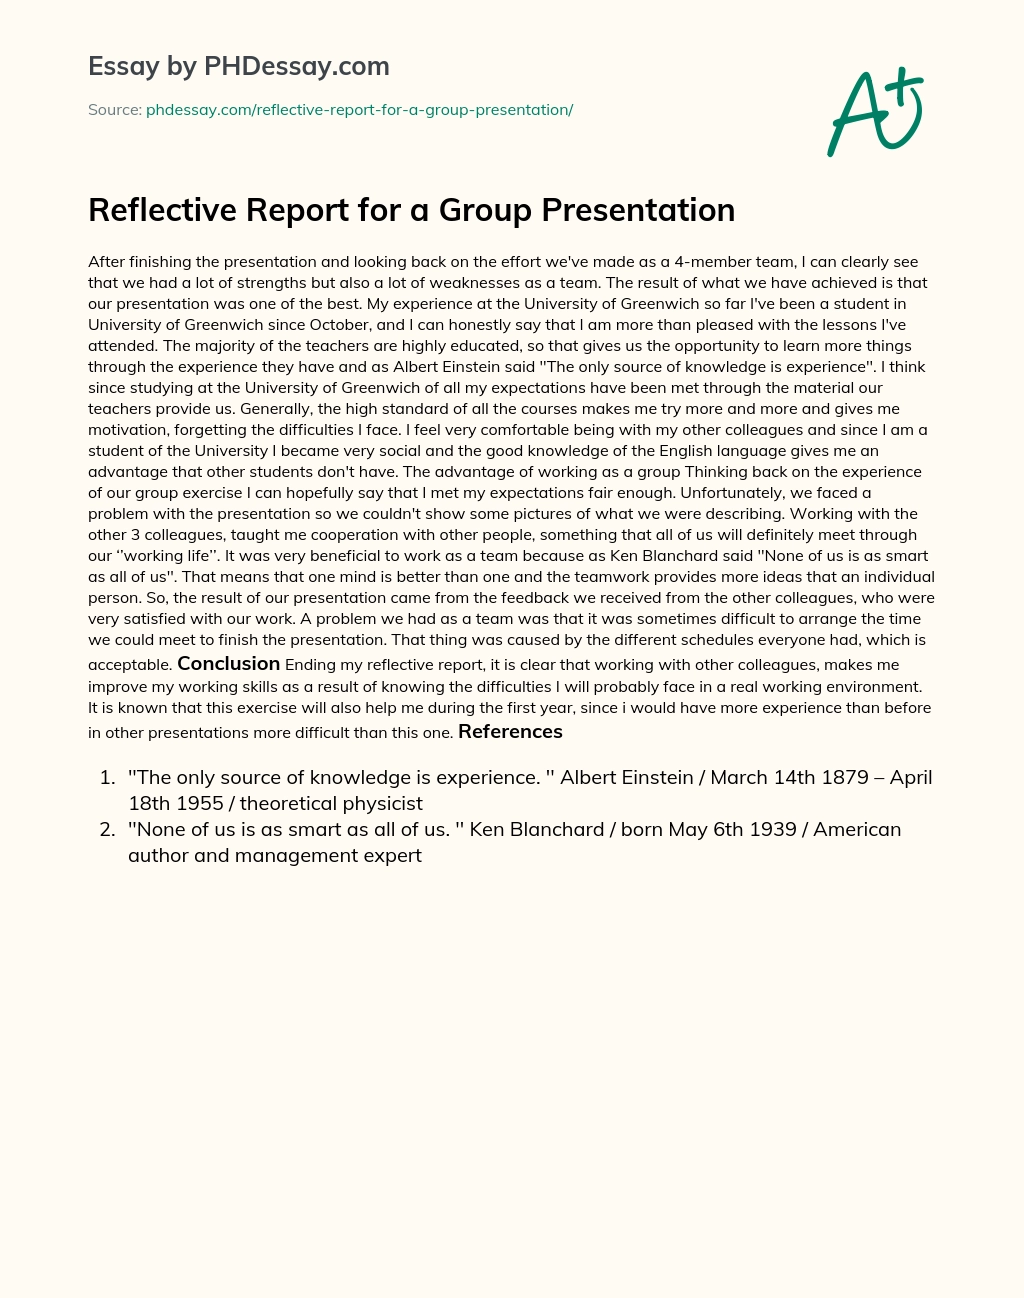 Reflective Report for a Group Presentation essay